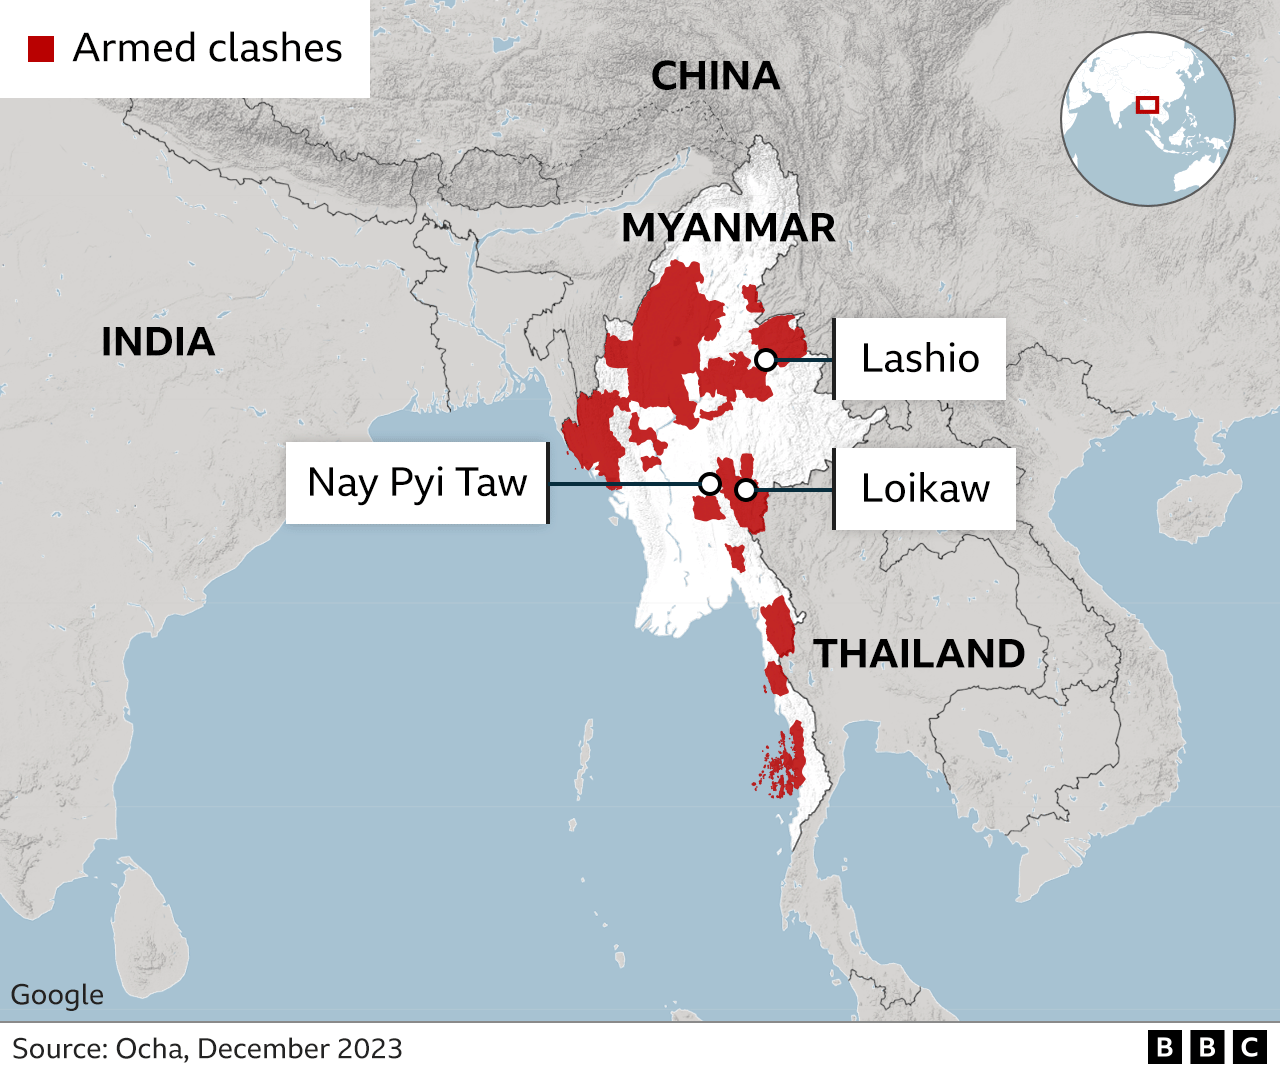 A BBC map - using data from OCHA from December 2023 - shows areas of Myanmar where armed clashes have been reported. Marked on the map are Nay Pyi taw, Loikaw and Lashio